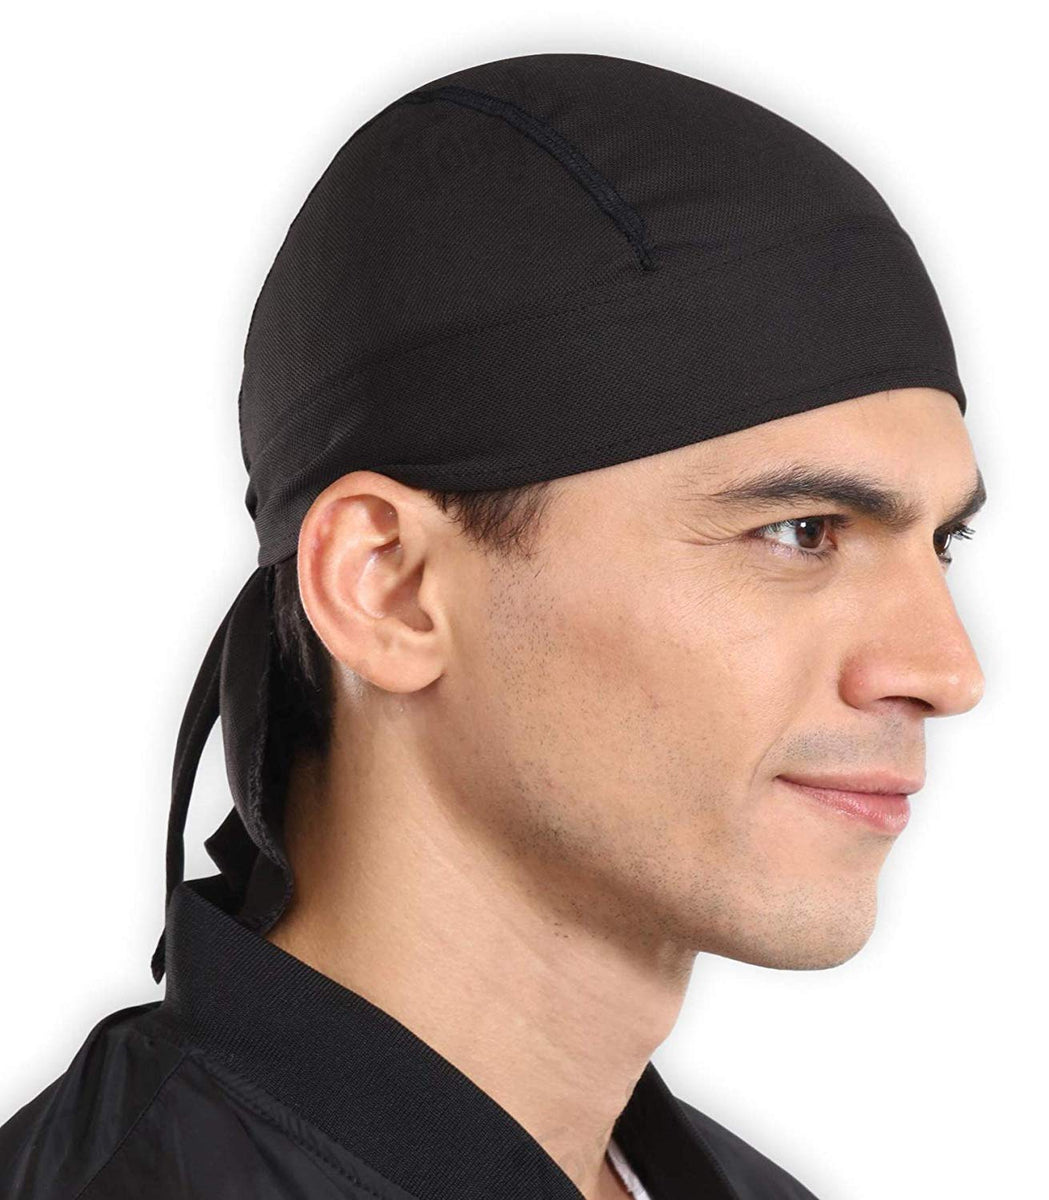 Cooling Skull Cap Or Helmet Liner - CPJC0209SG - IdeaStage Promotional  Products